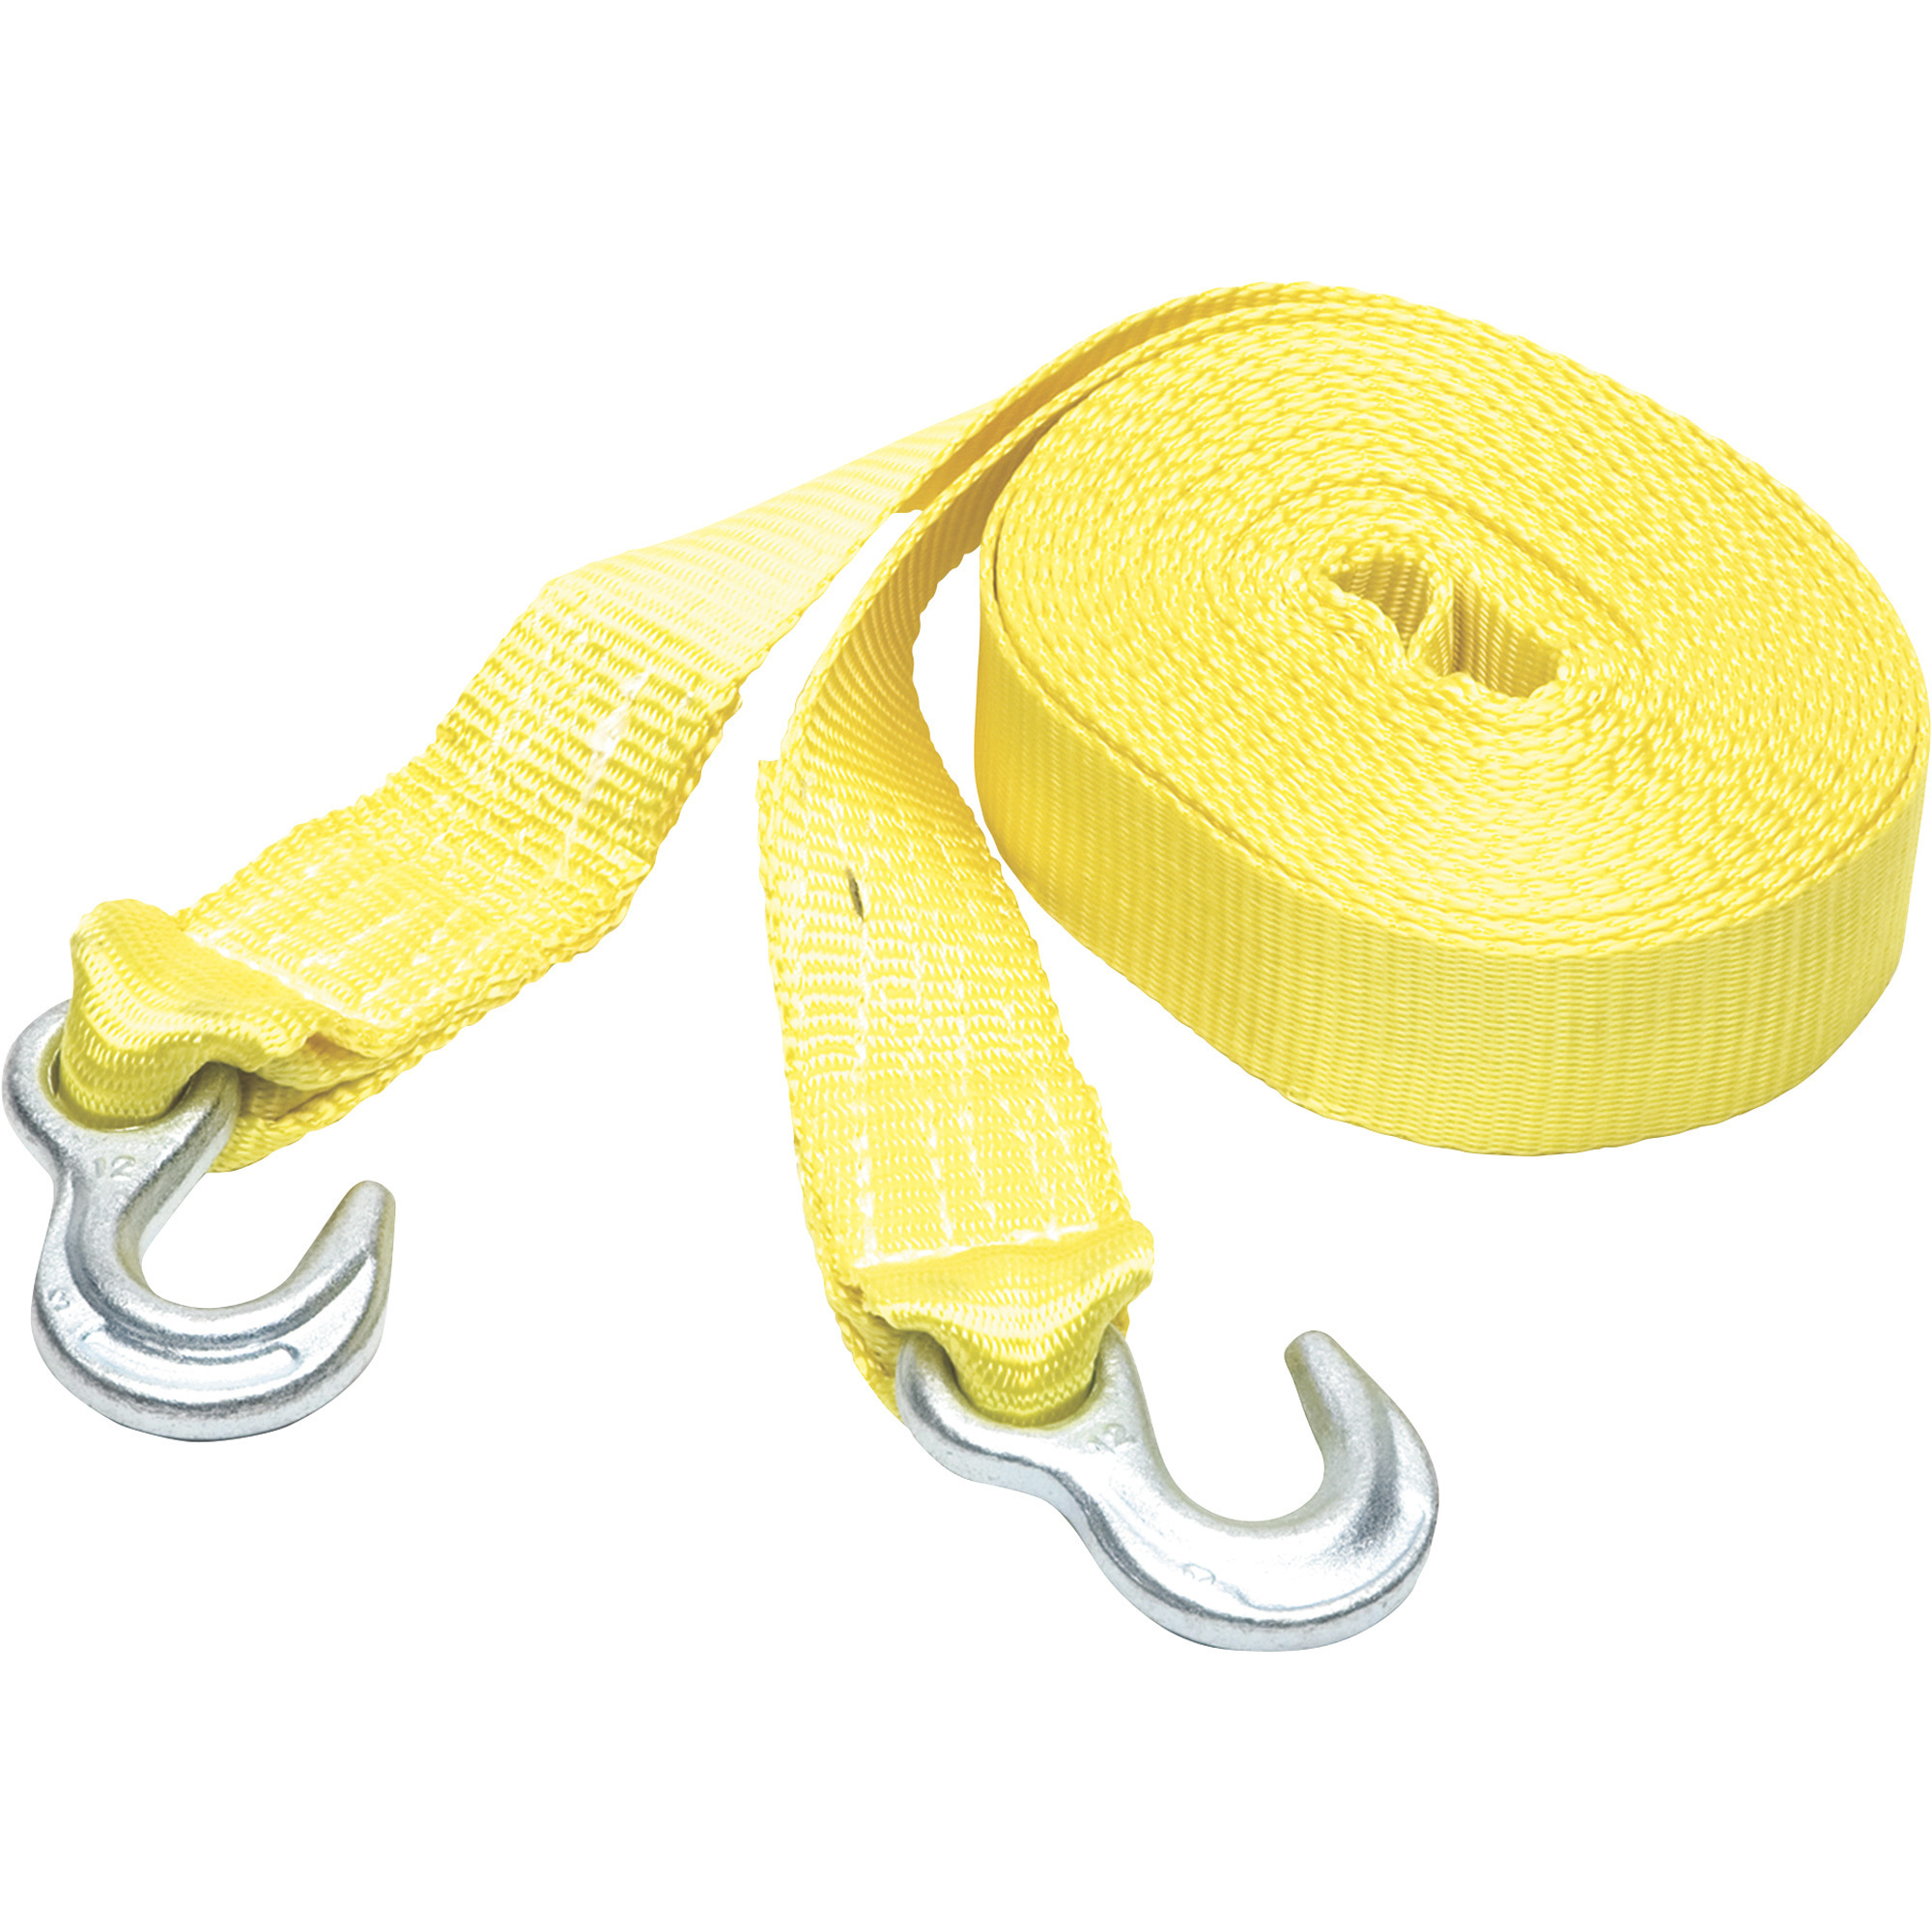 SmartStraps Heavy-Duty Tow Strap with Hooks, 30ft.L, 9,000-Lb. Breaking Strength, Yellow, Model 132